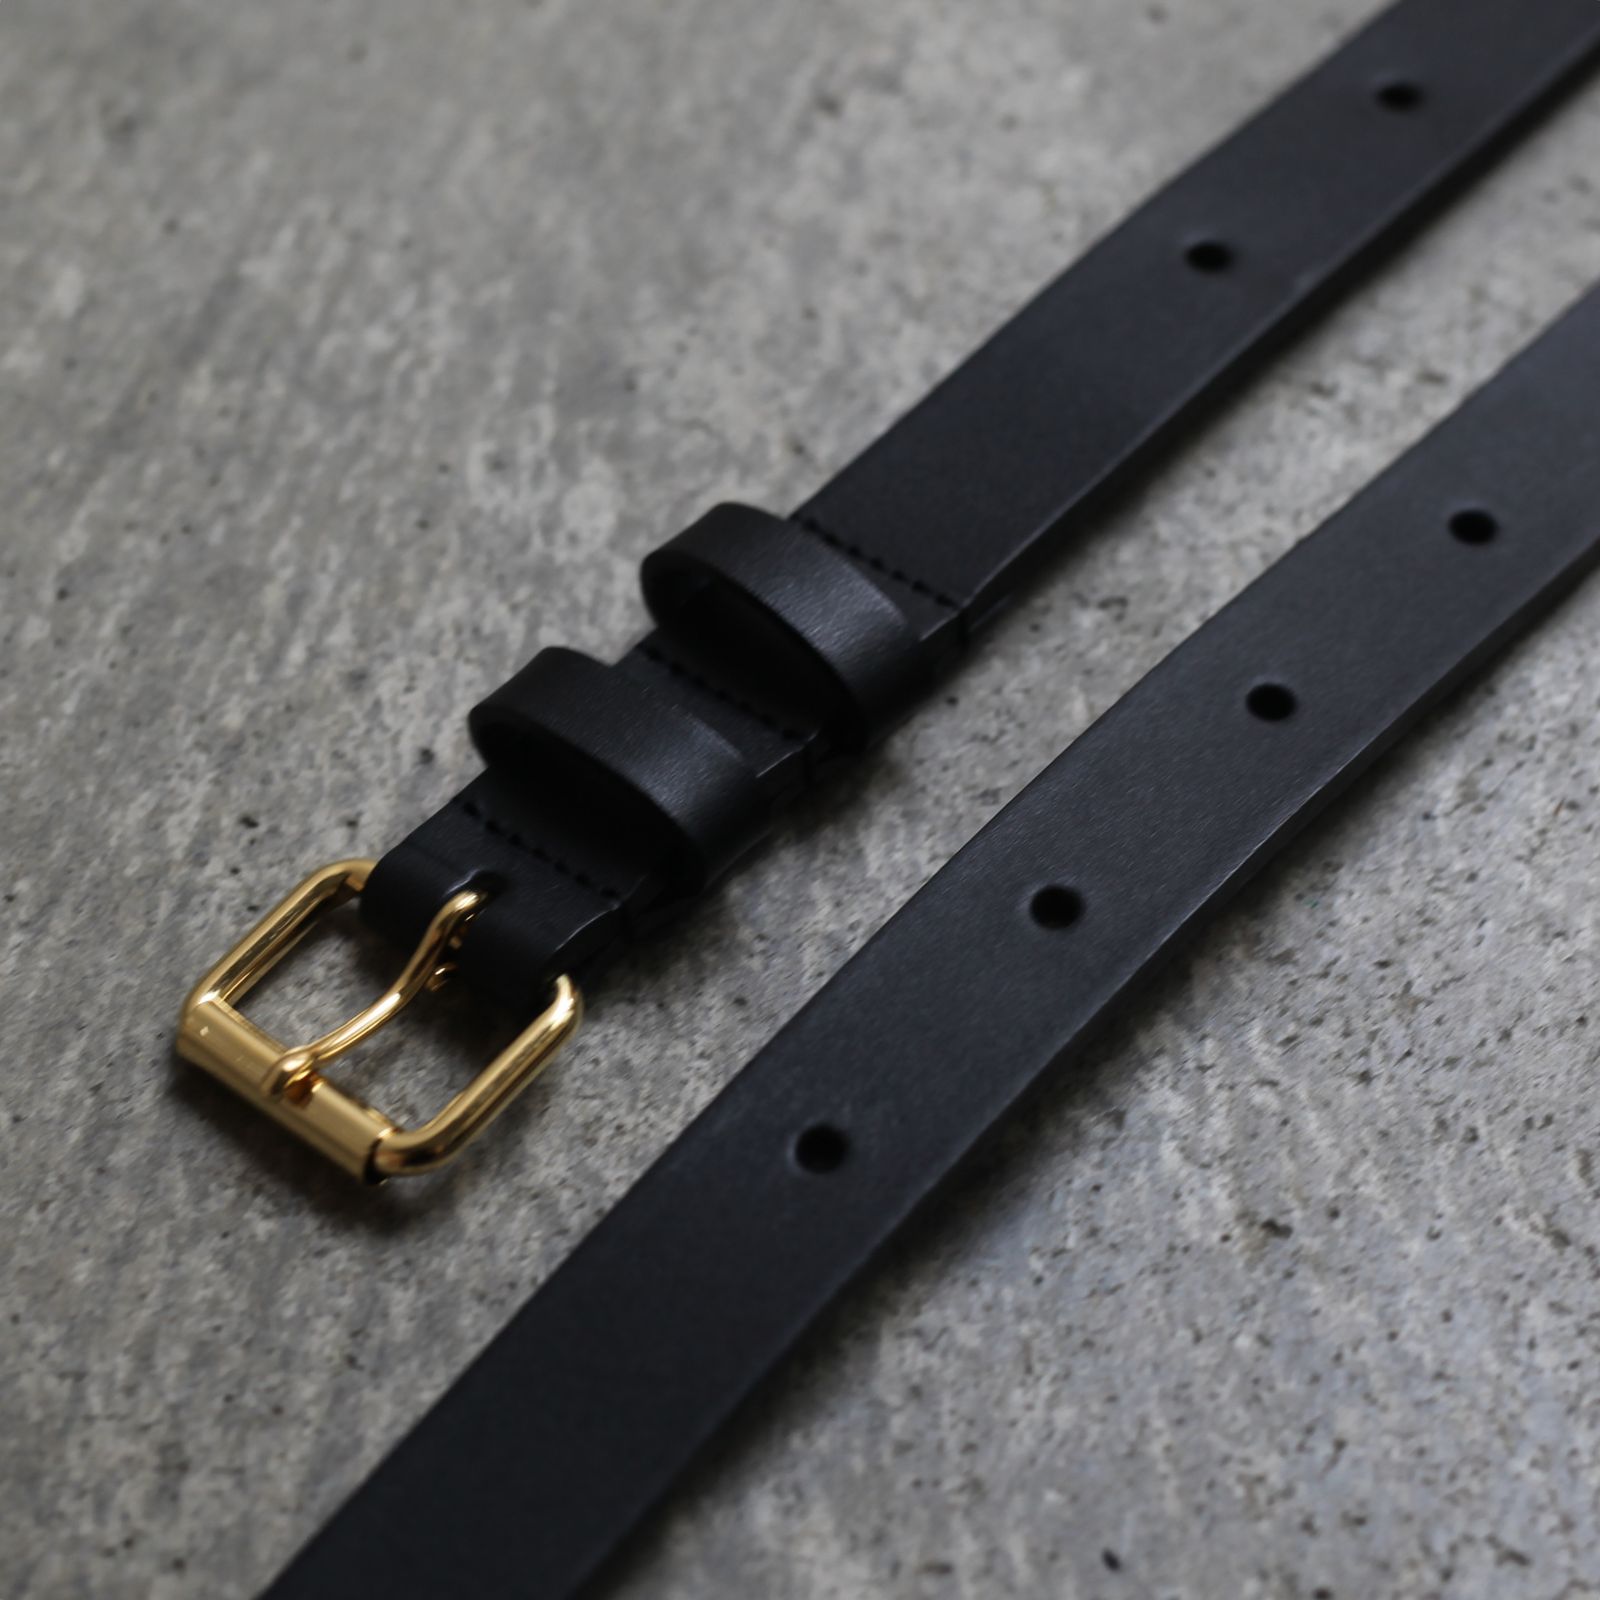 th products - 【残りわずか】Leather Belt SKI 20 | ACRMTSM ONLINE STORE